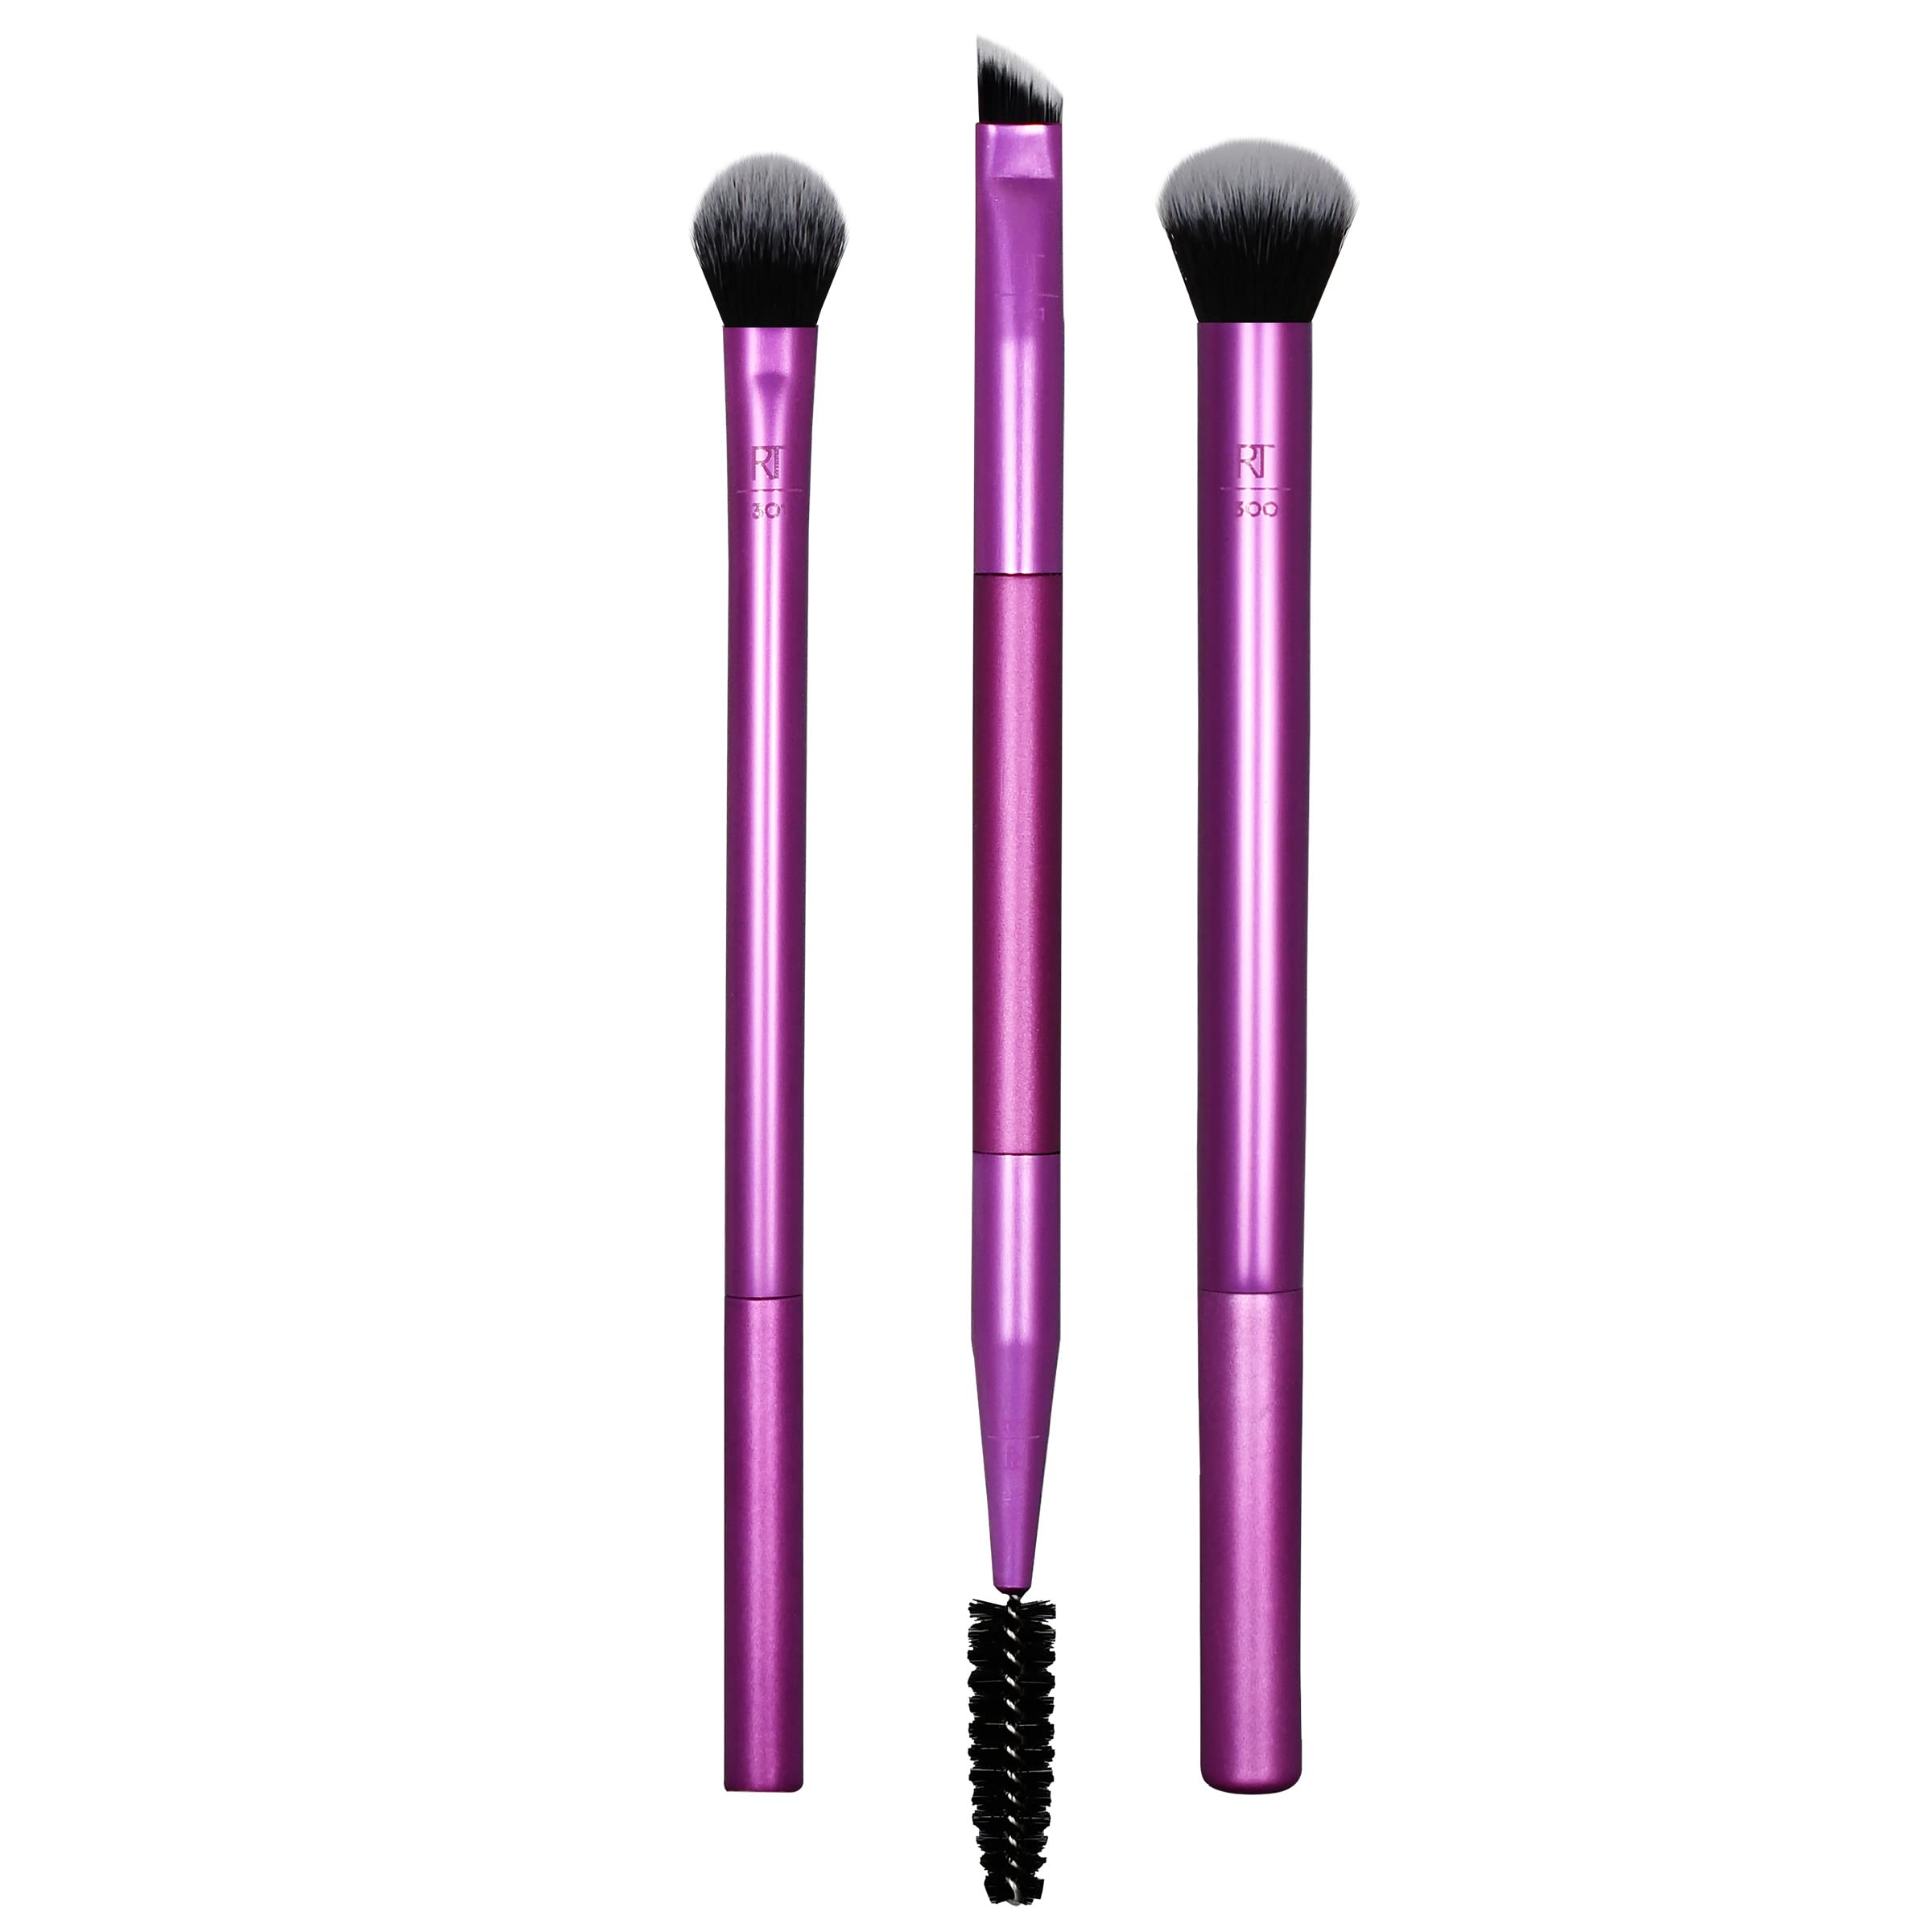 Real Techniques Eye Shade & Blend Makeup Brush Trio, For Eyeshadow & Liner, Makeup Tools for Shaping & Grooming Brows, Defined Makeup Look, Synthetic Bristles, Vegan & Cruelty-Free, 3 Count